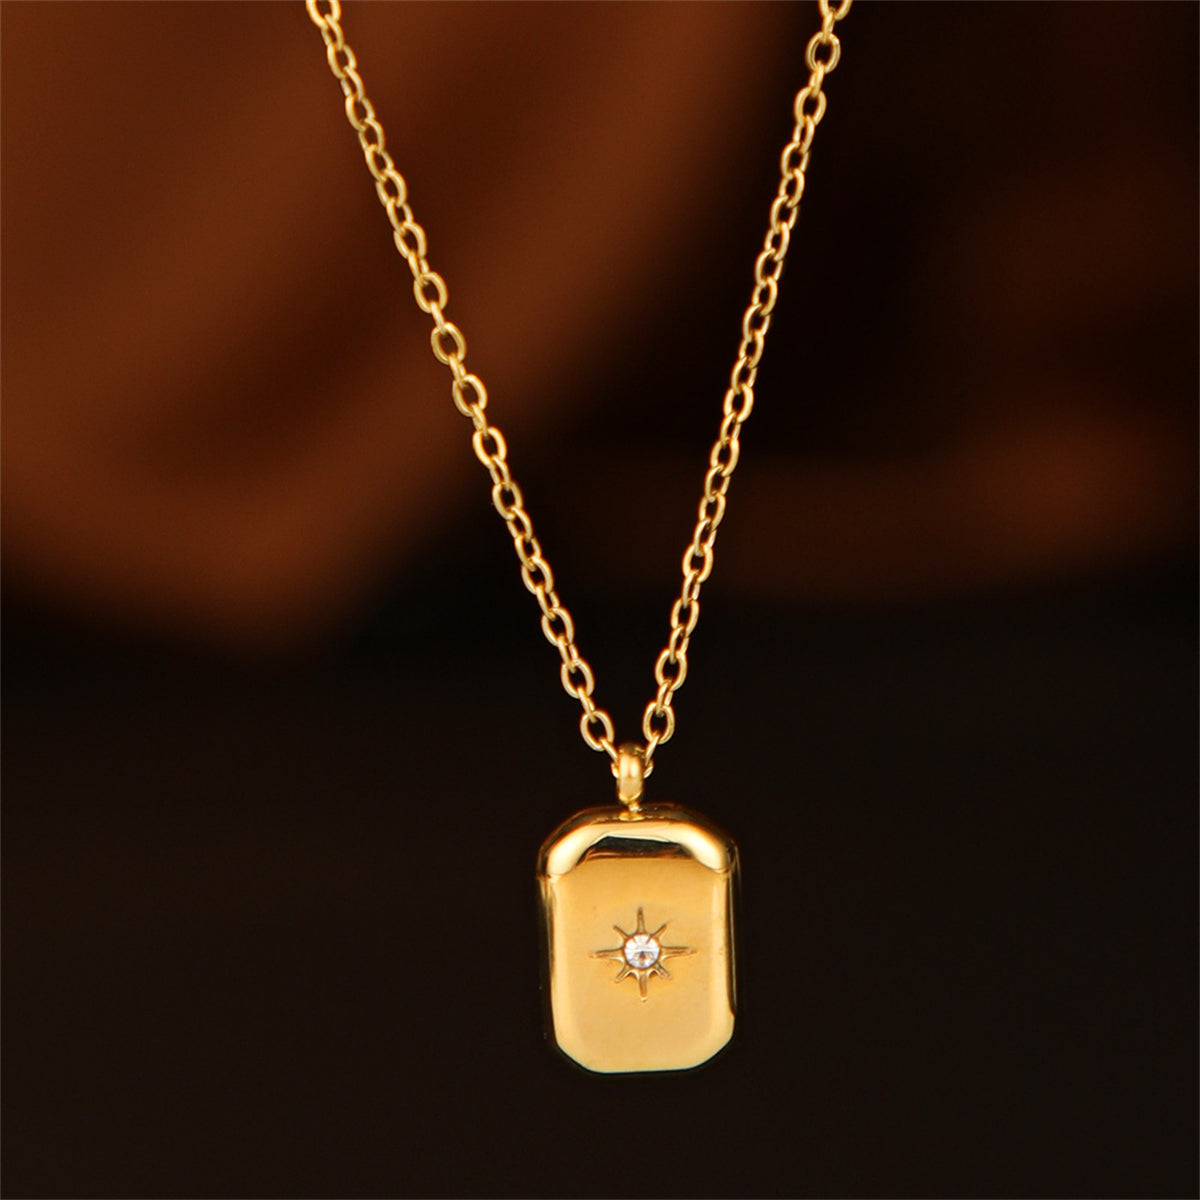 Cubic Zirconia & 18K Gold-Plated Star Card Pendant Necklace